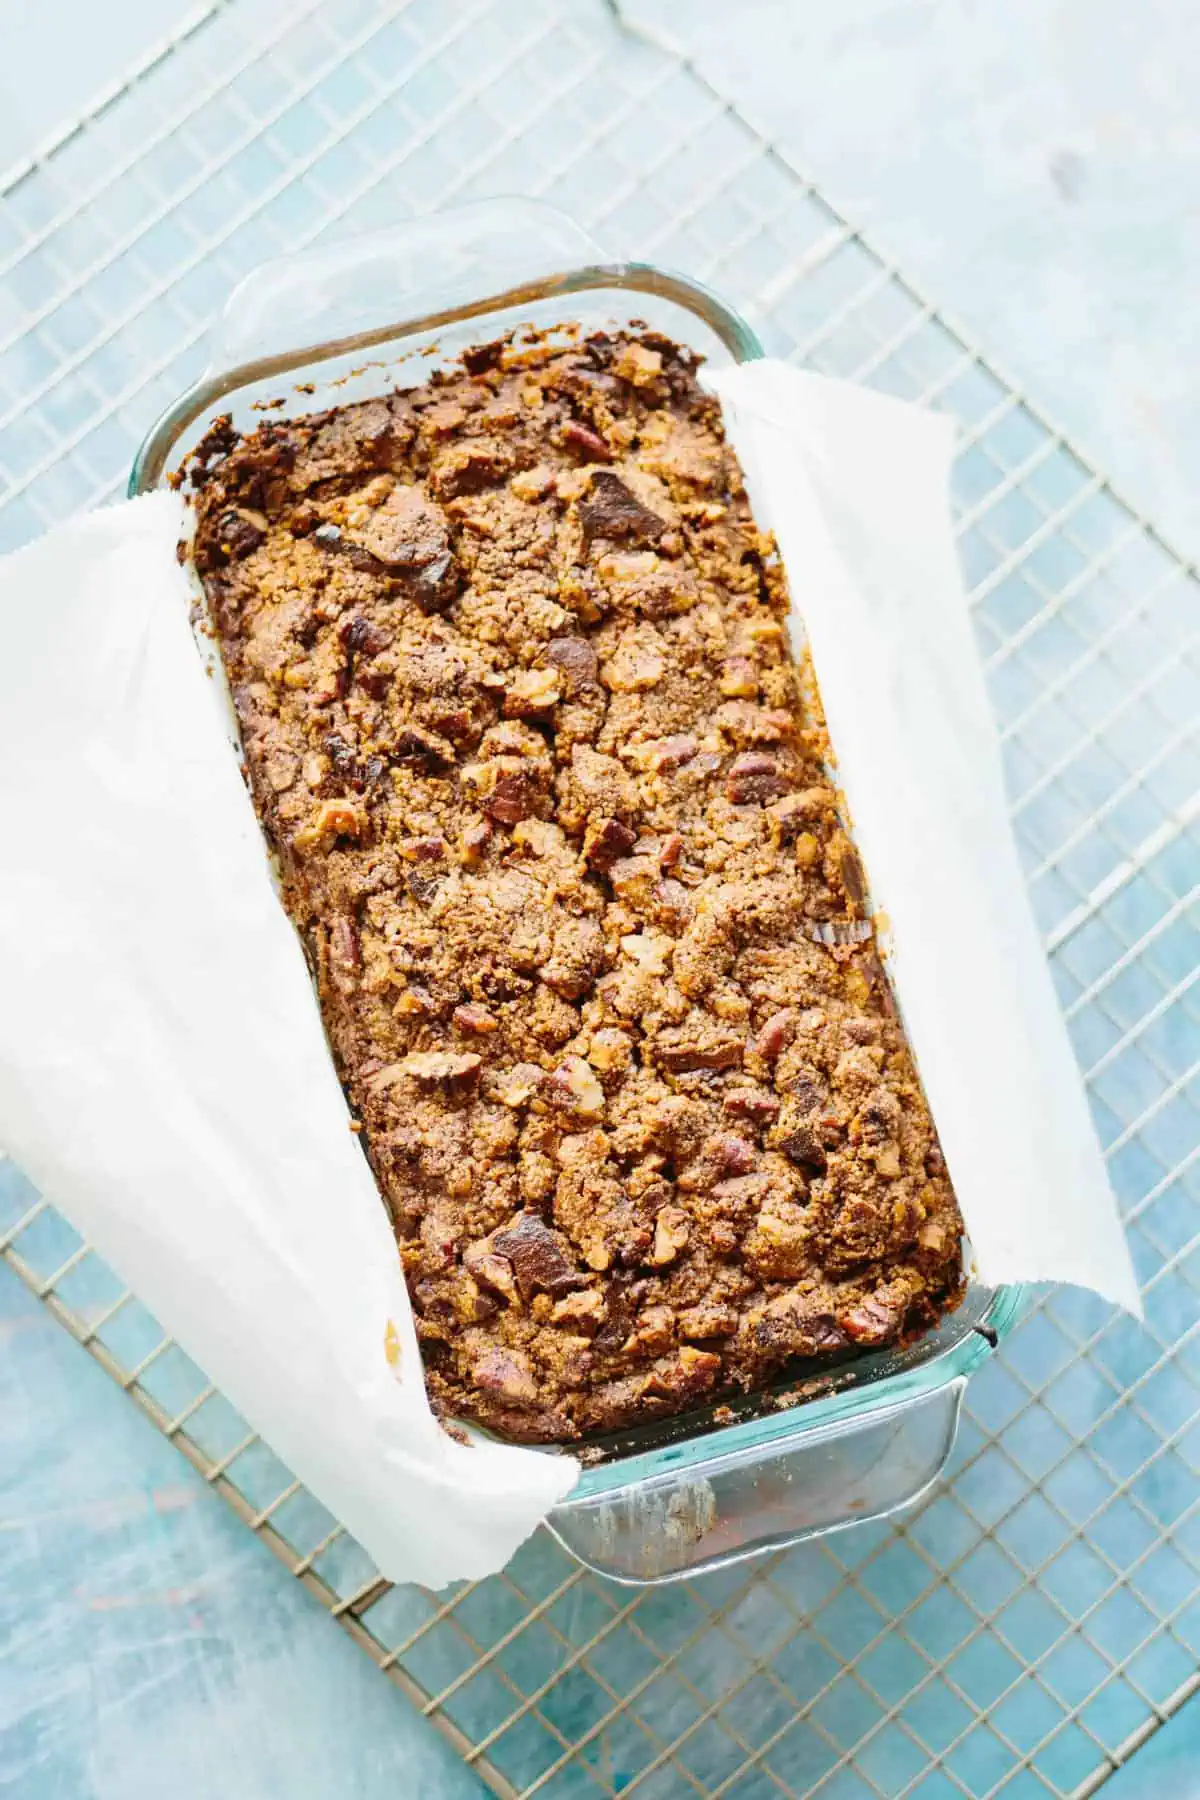 Top view of baked Paleo pecan streusel banana bread in a parchment-lined loaf pan.